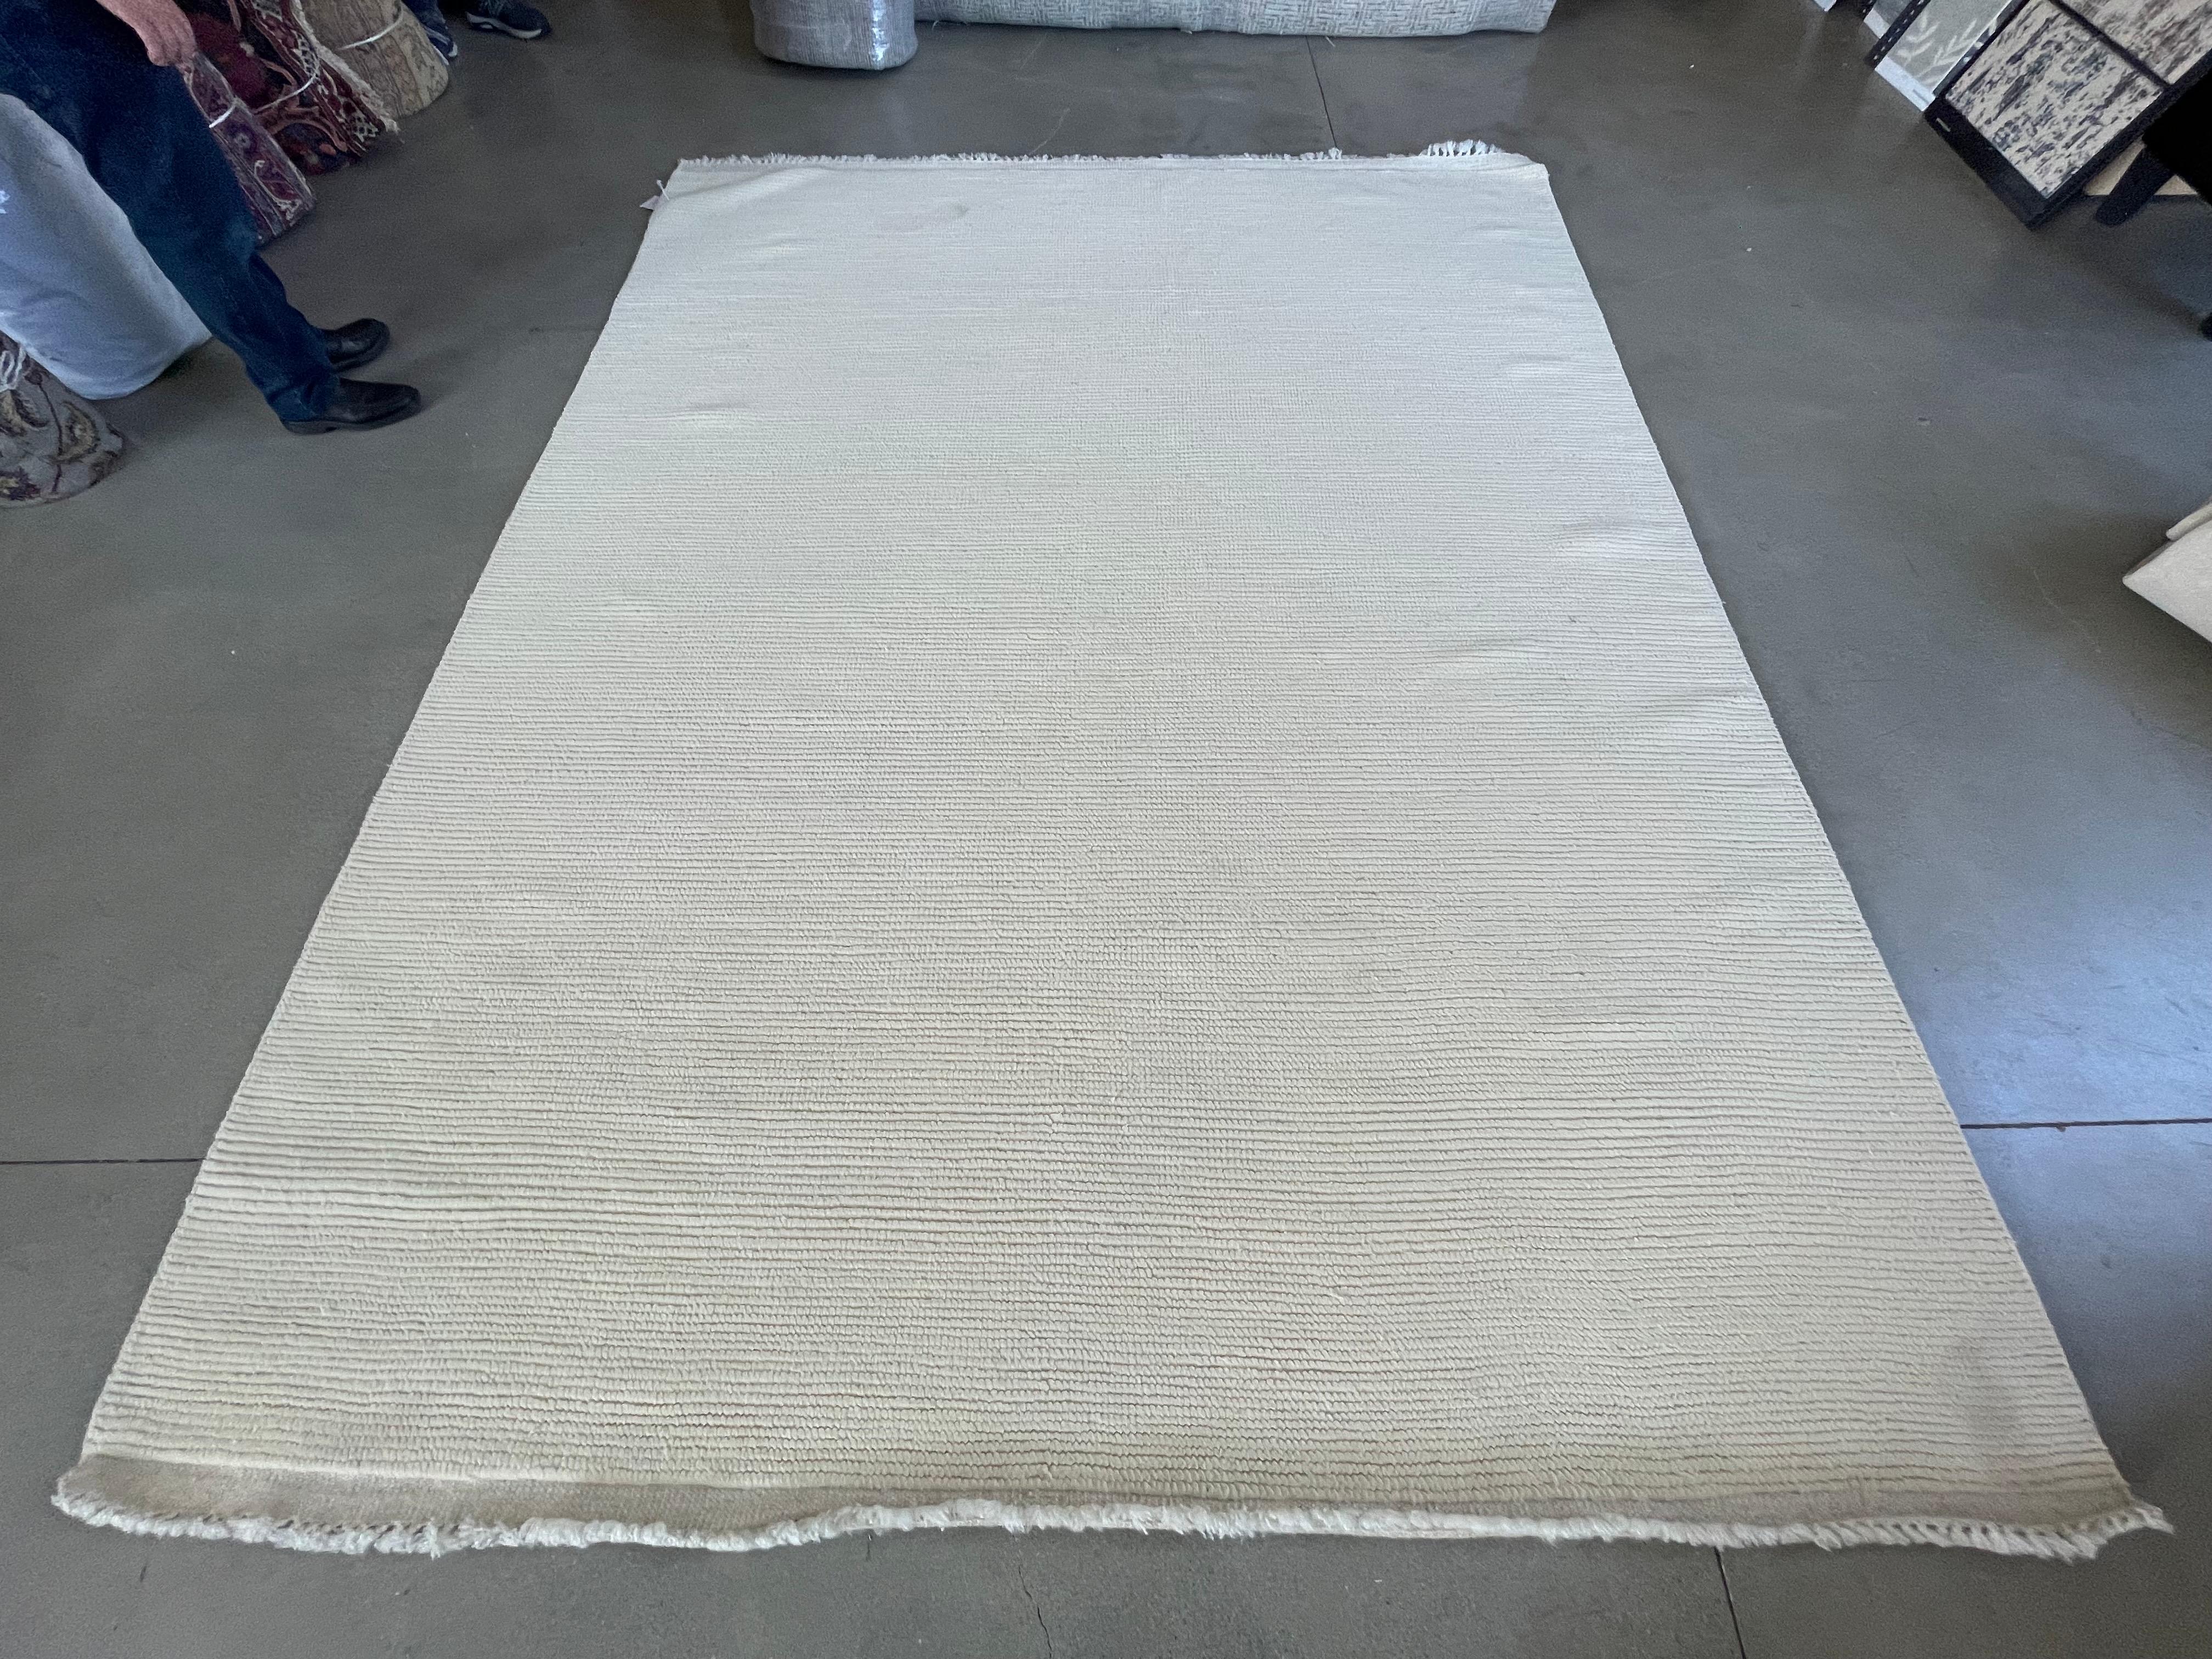 Coming from our newest collection of Moroccan designs, this 8x10 cream plain ribbed Moroccan design area rug is handmade and hand-knotted made in India. It has a cotton base and is made from all wool yarns. It's solid cream color makes it easy to